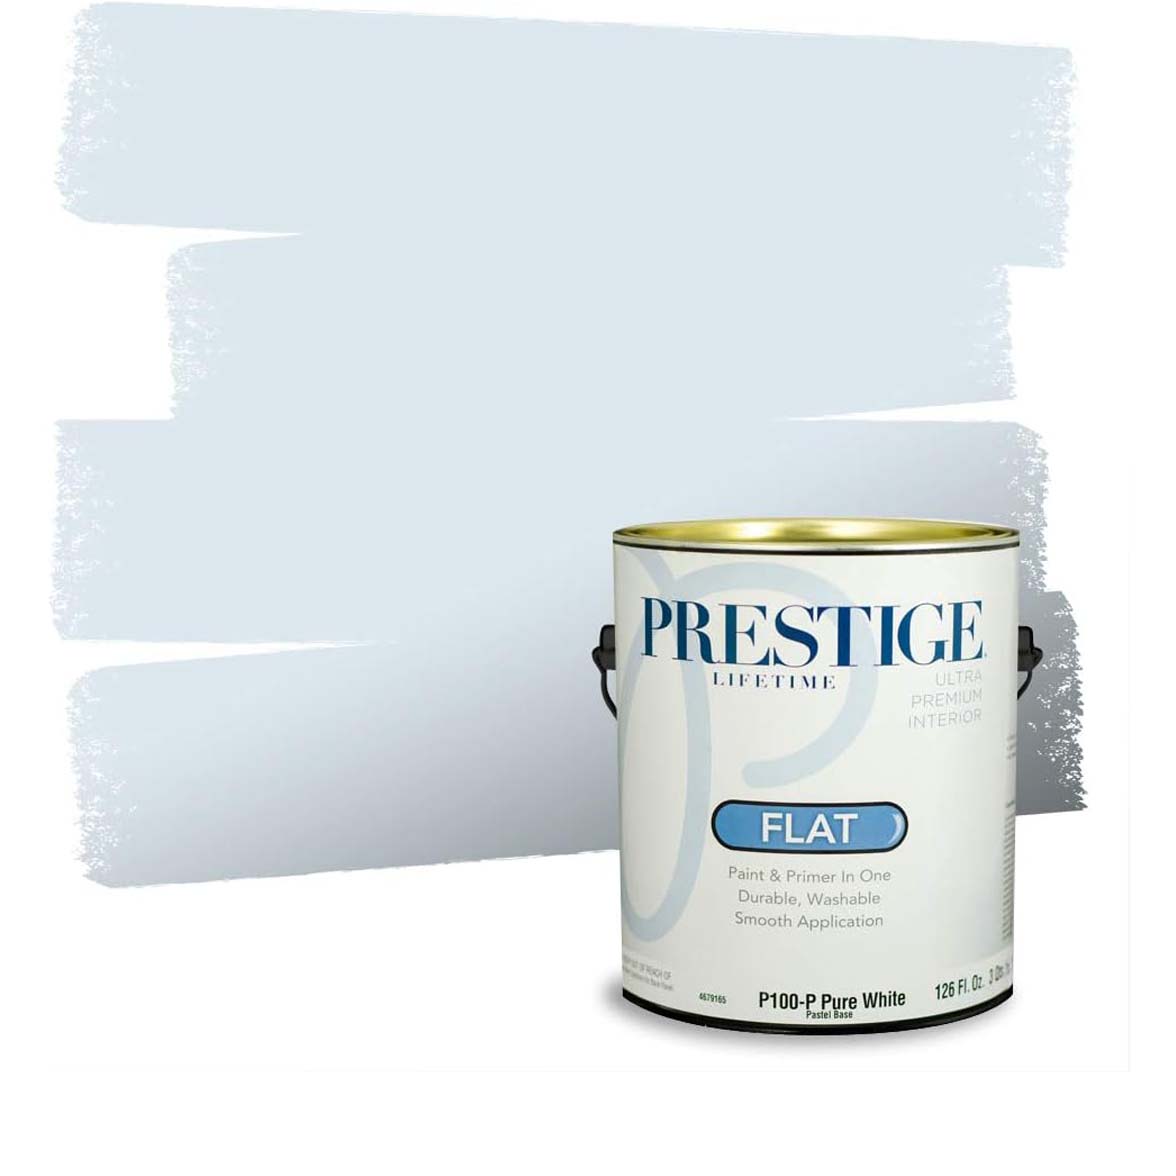 PRESTIGE Paints Interior Paint and Primer in One in Blue Mist